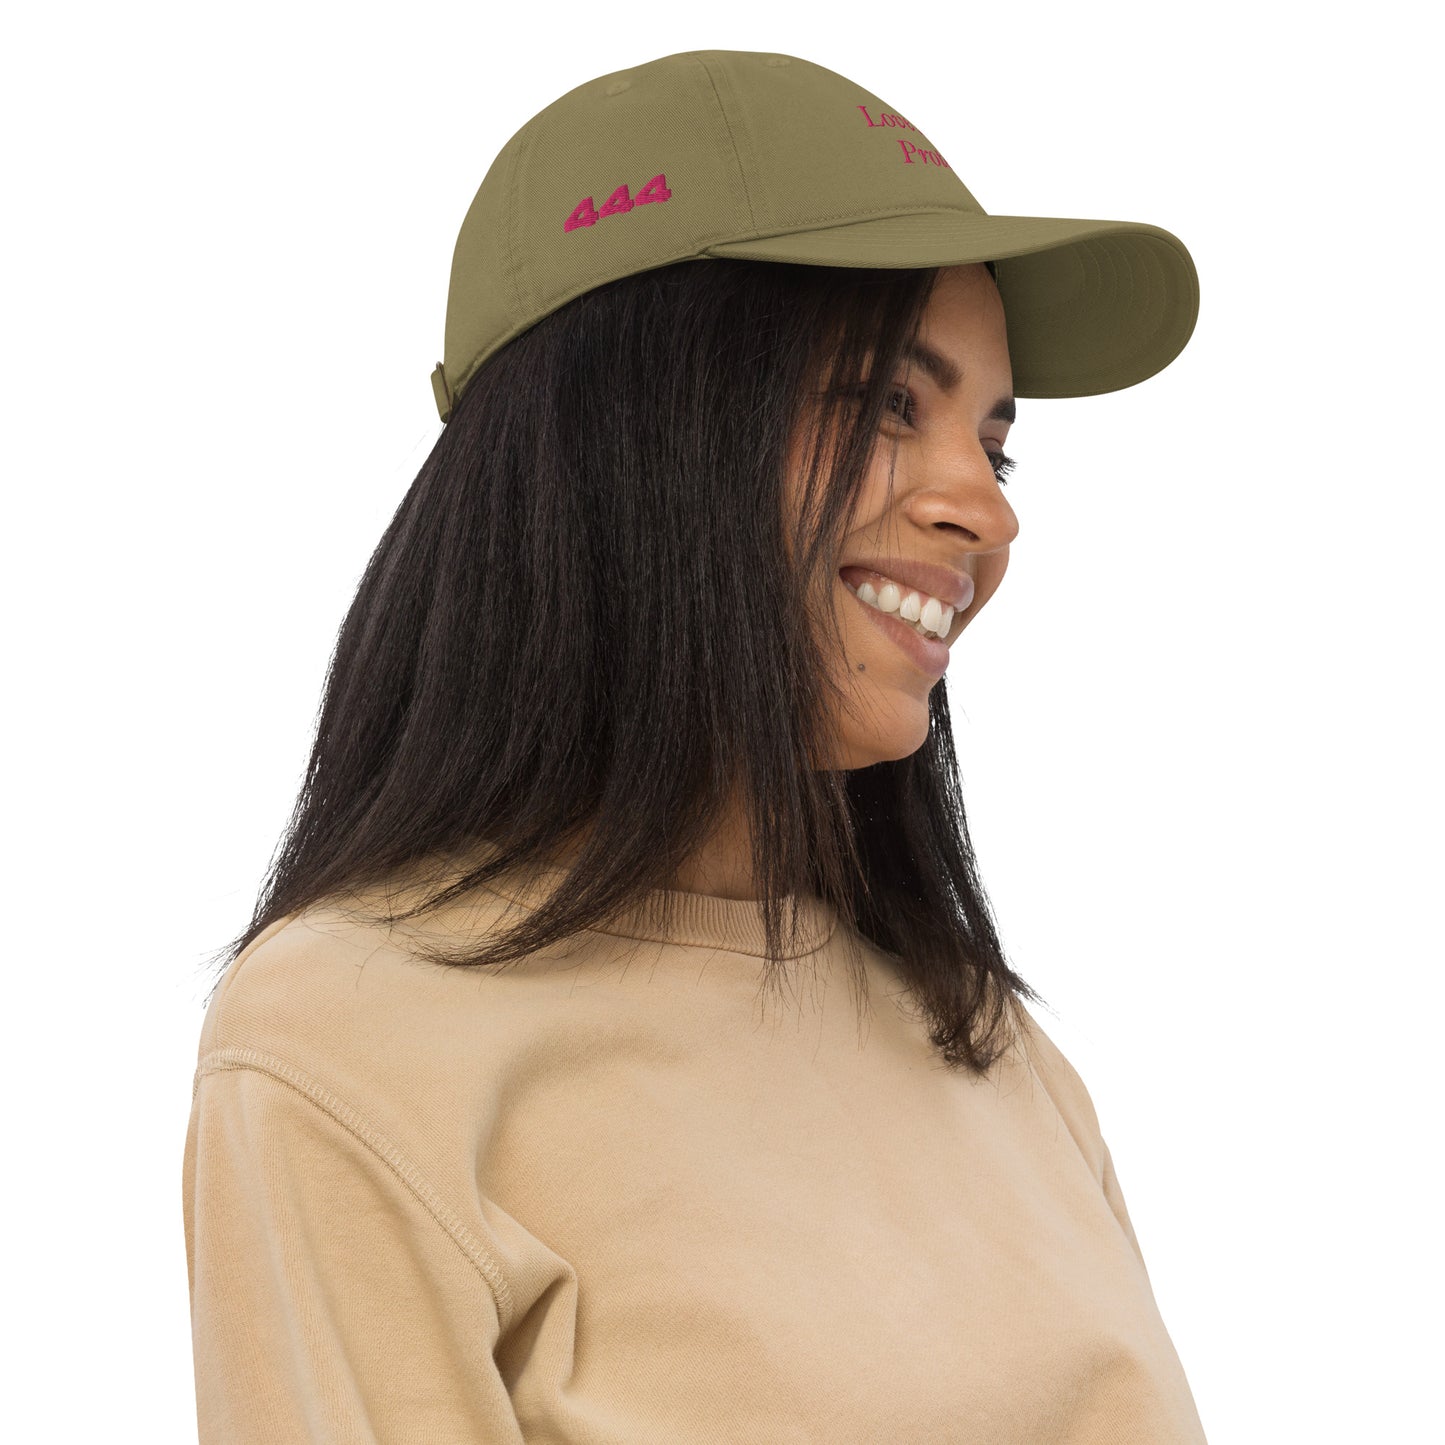 Love Will Protect Organic Cotton Dad Hat